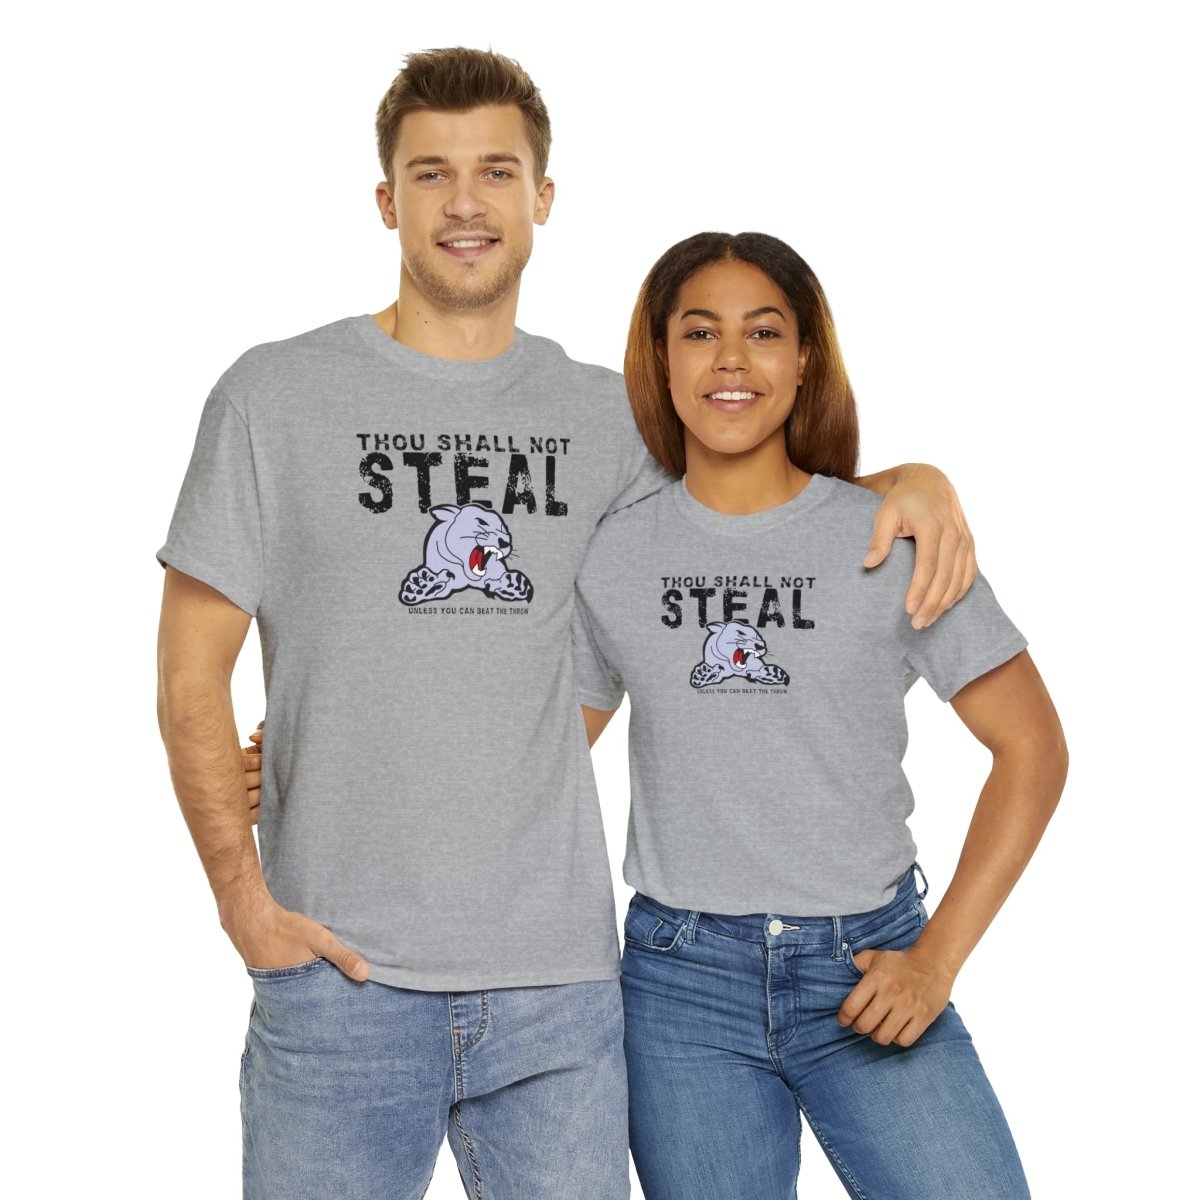 Cougar Shall Not Steal Cotton T-shirt